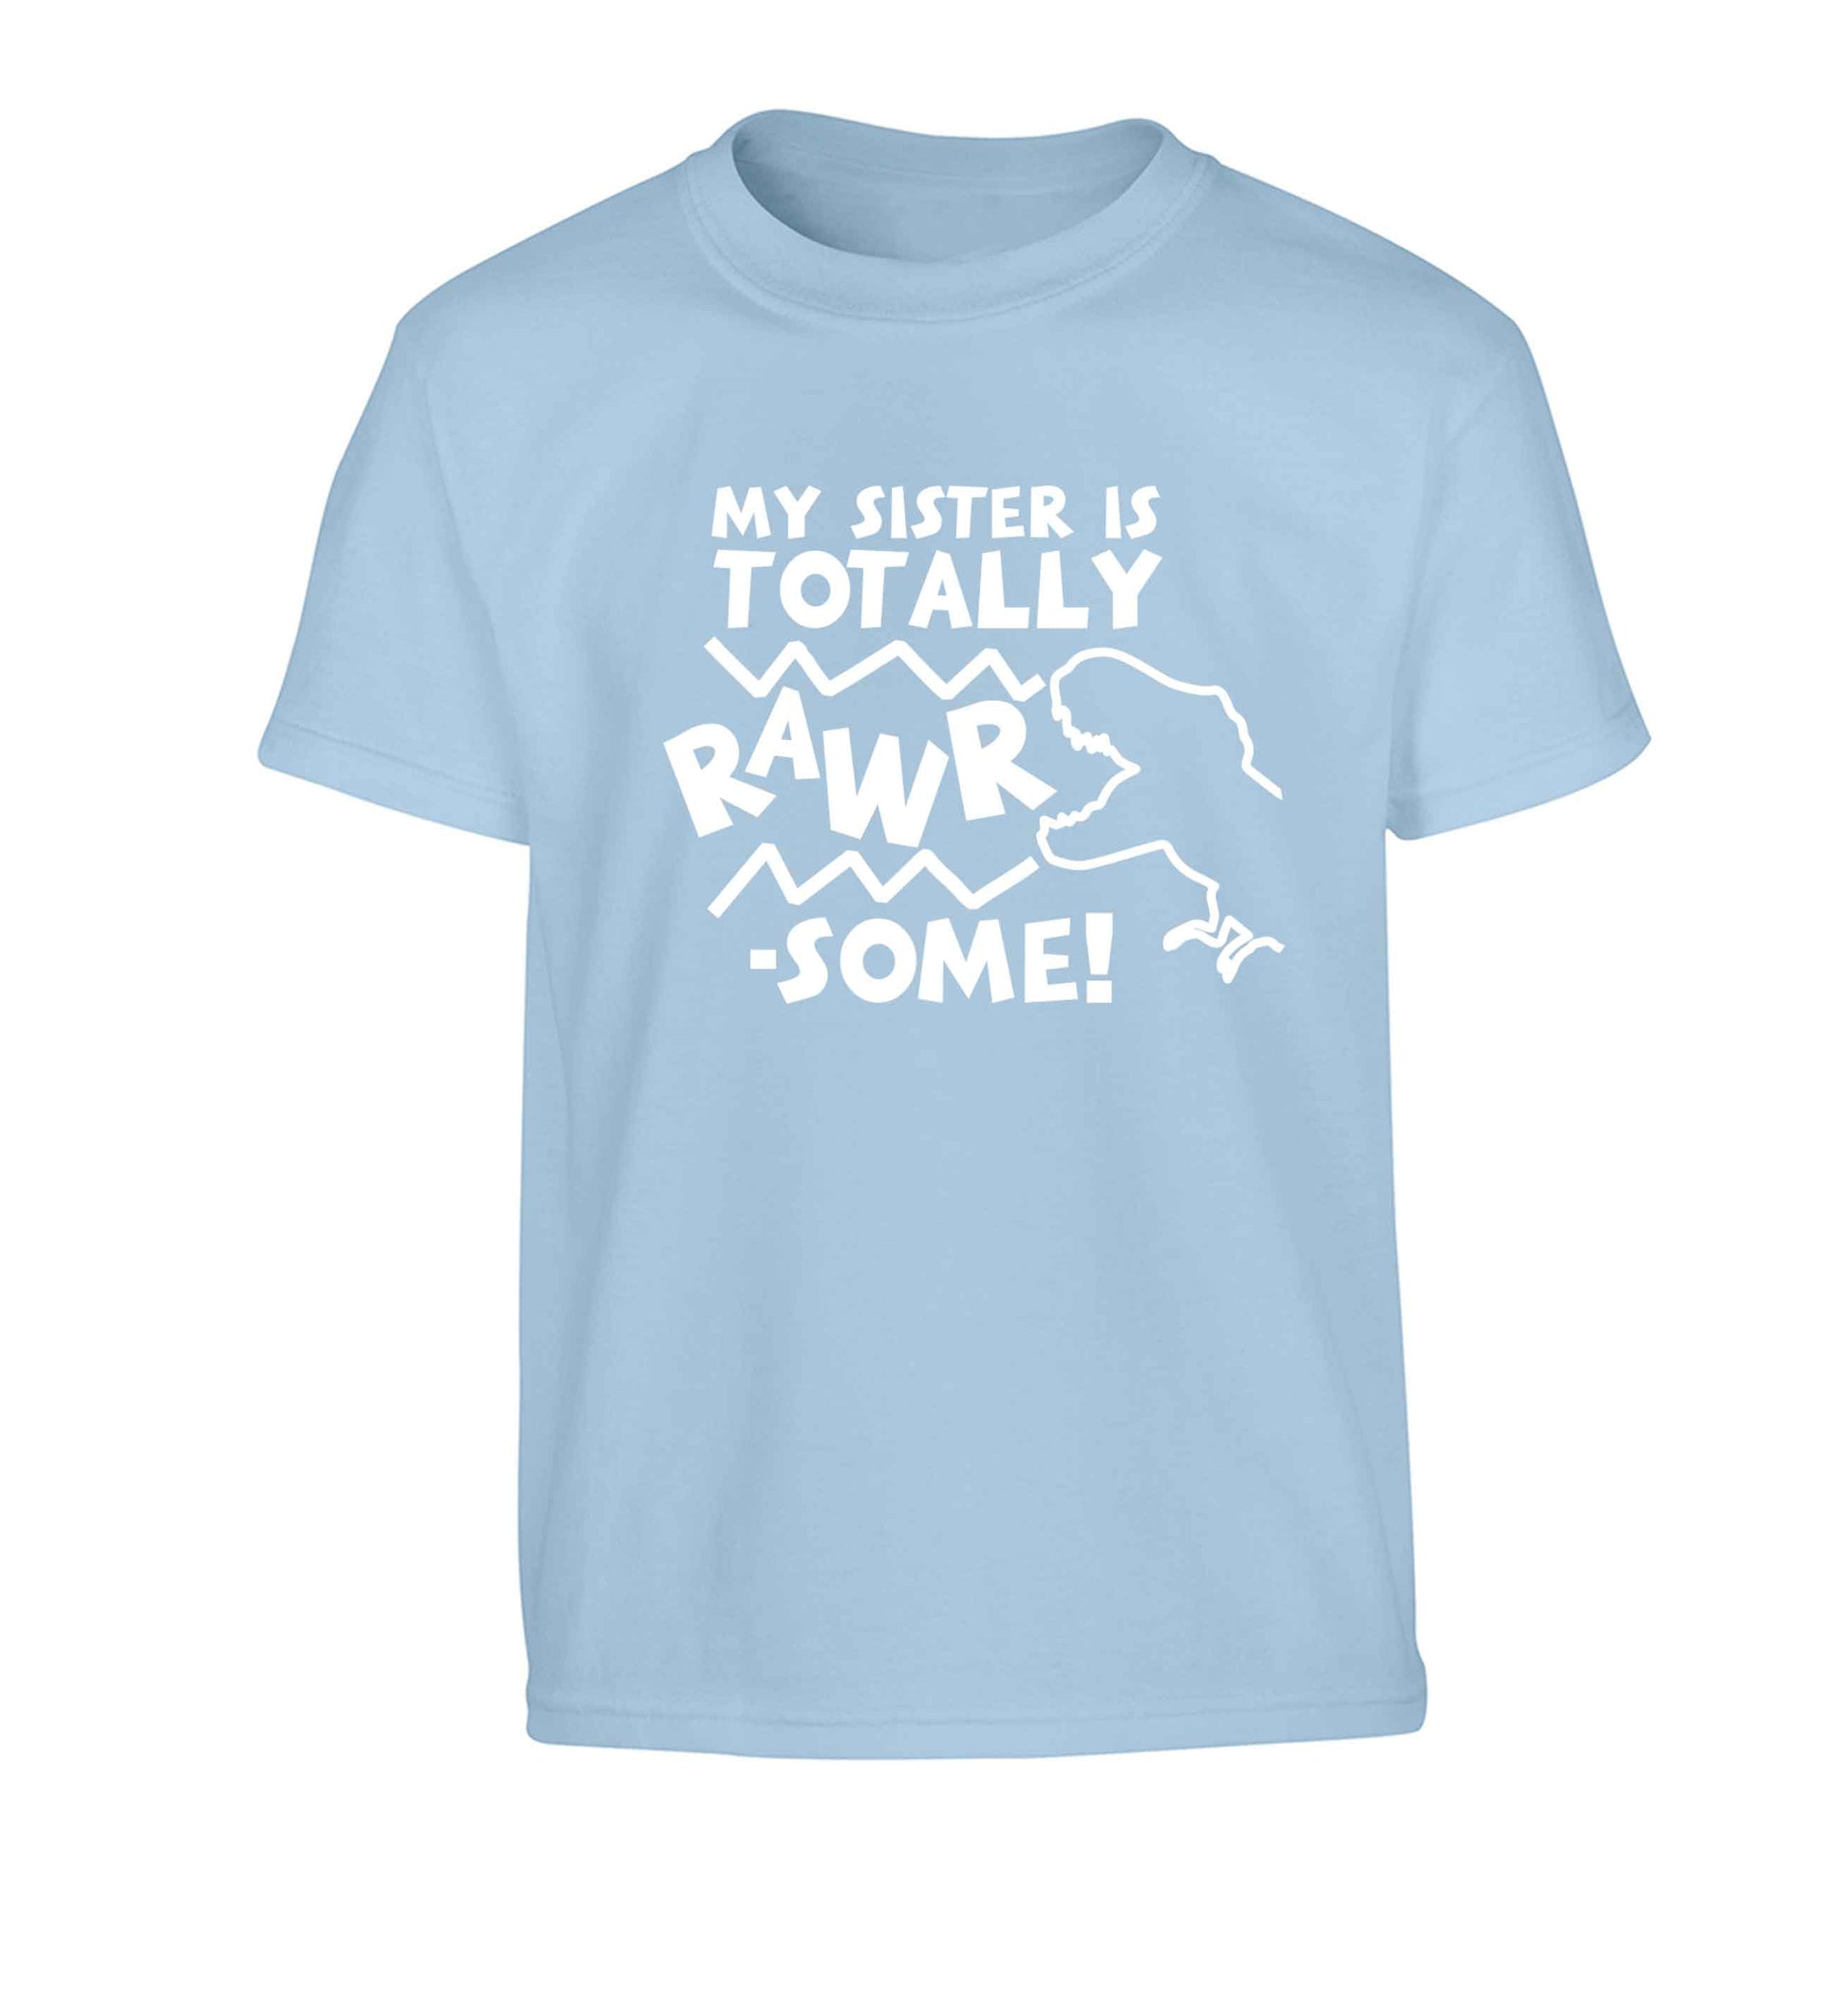 My sister is totally rawrsome Children's light blue Tshirt 12-13 Years